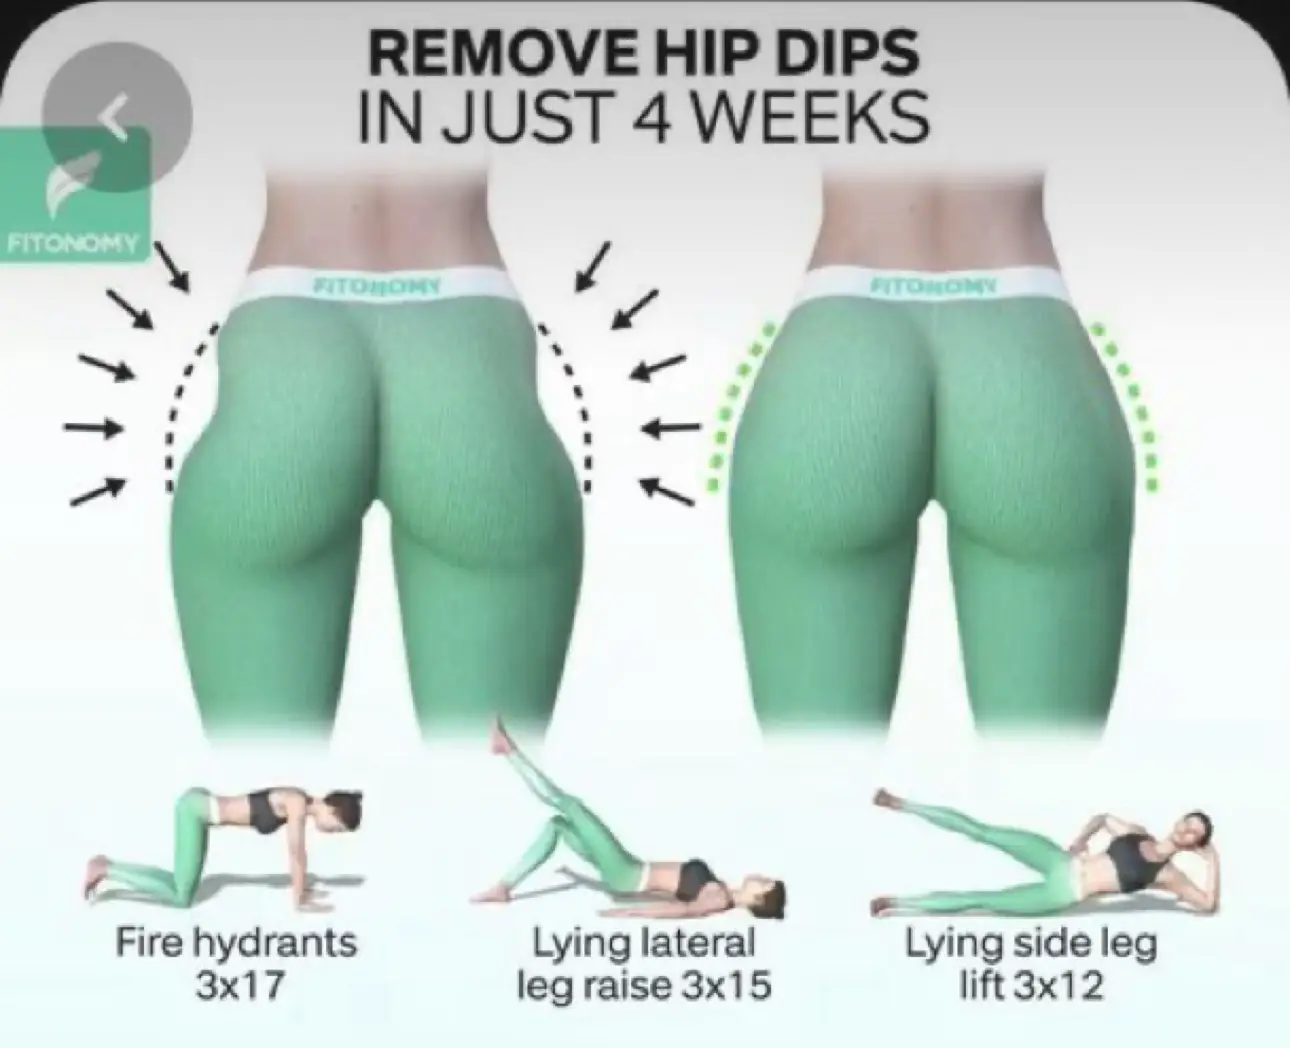 Fitonomy App - Hip dips are one of the most searched for topics on Google  which means a lot of people deal with them. They are not harmful to your  body in